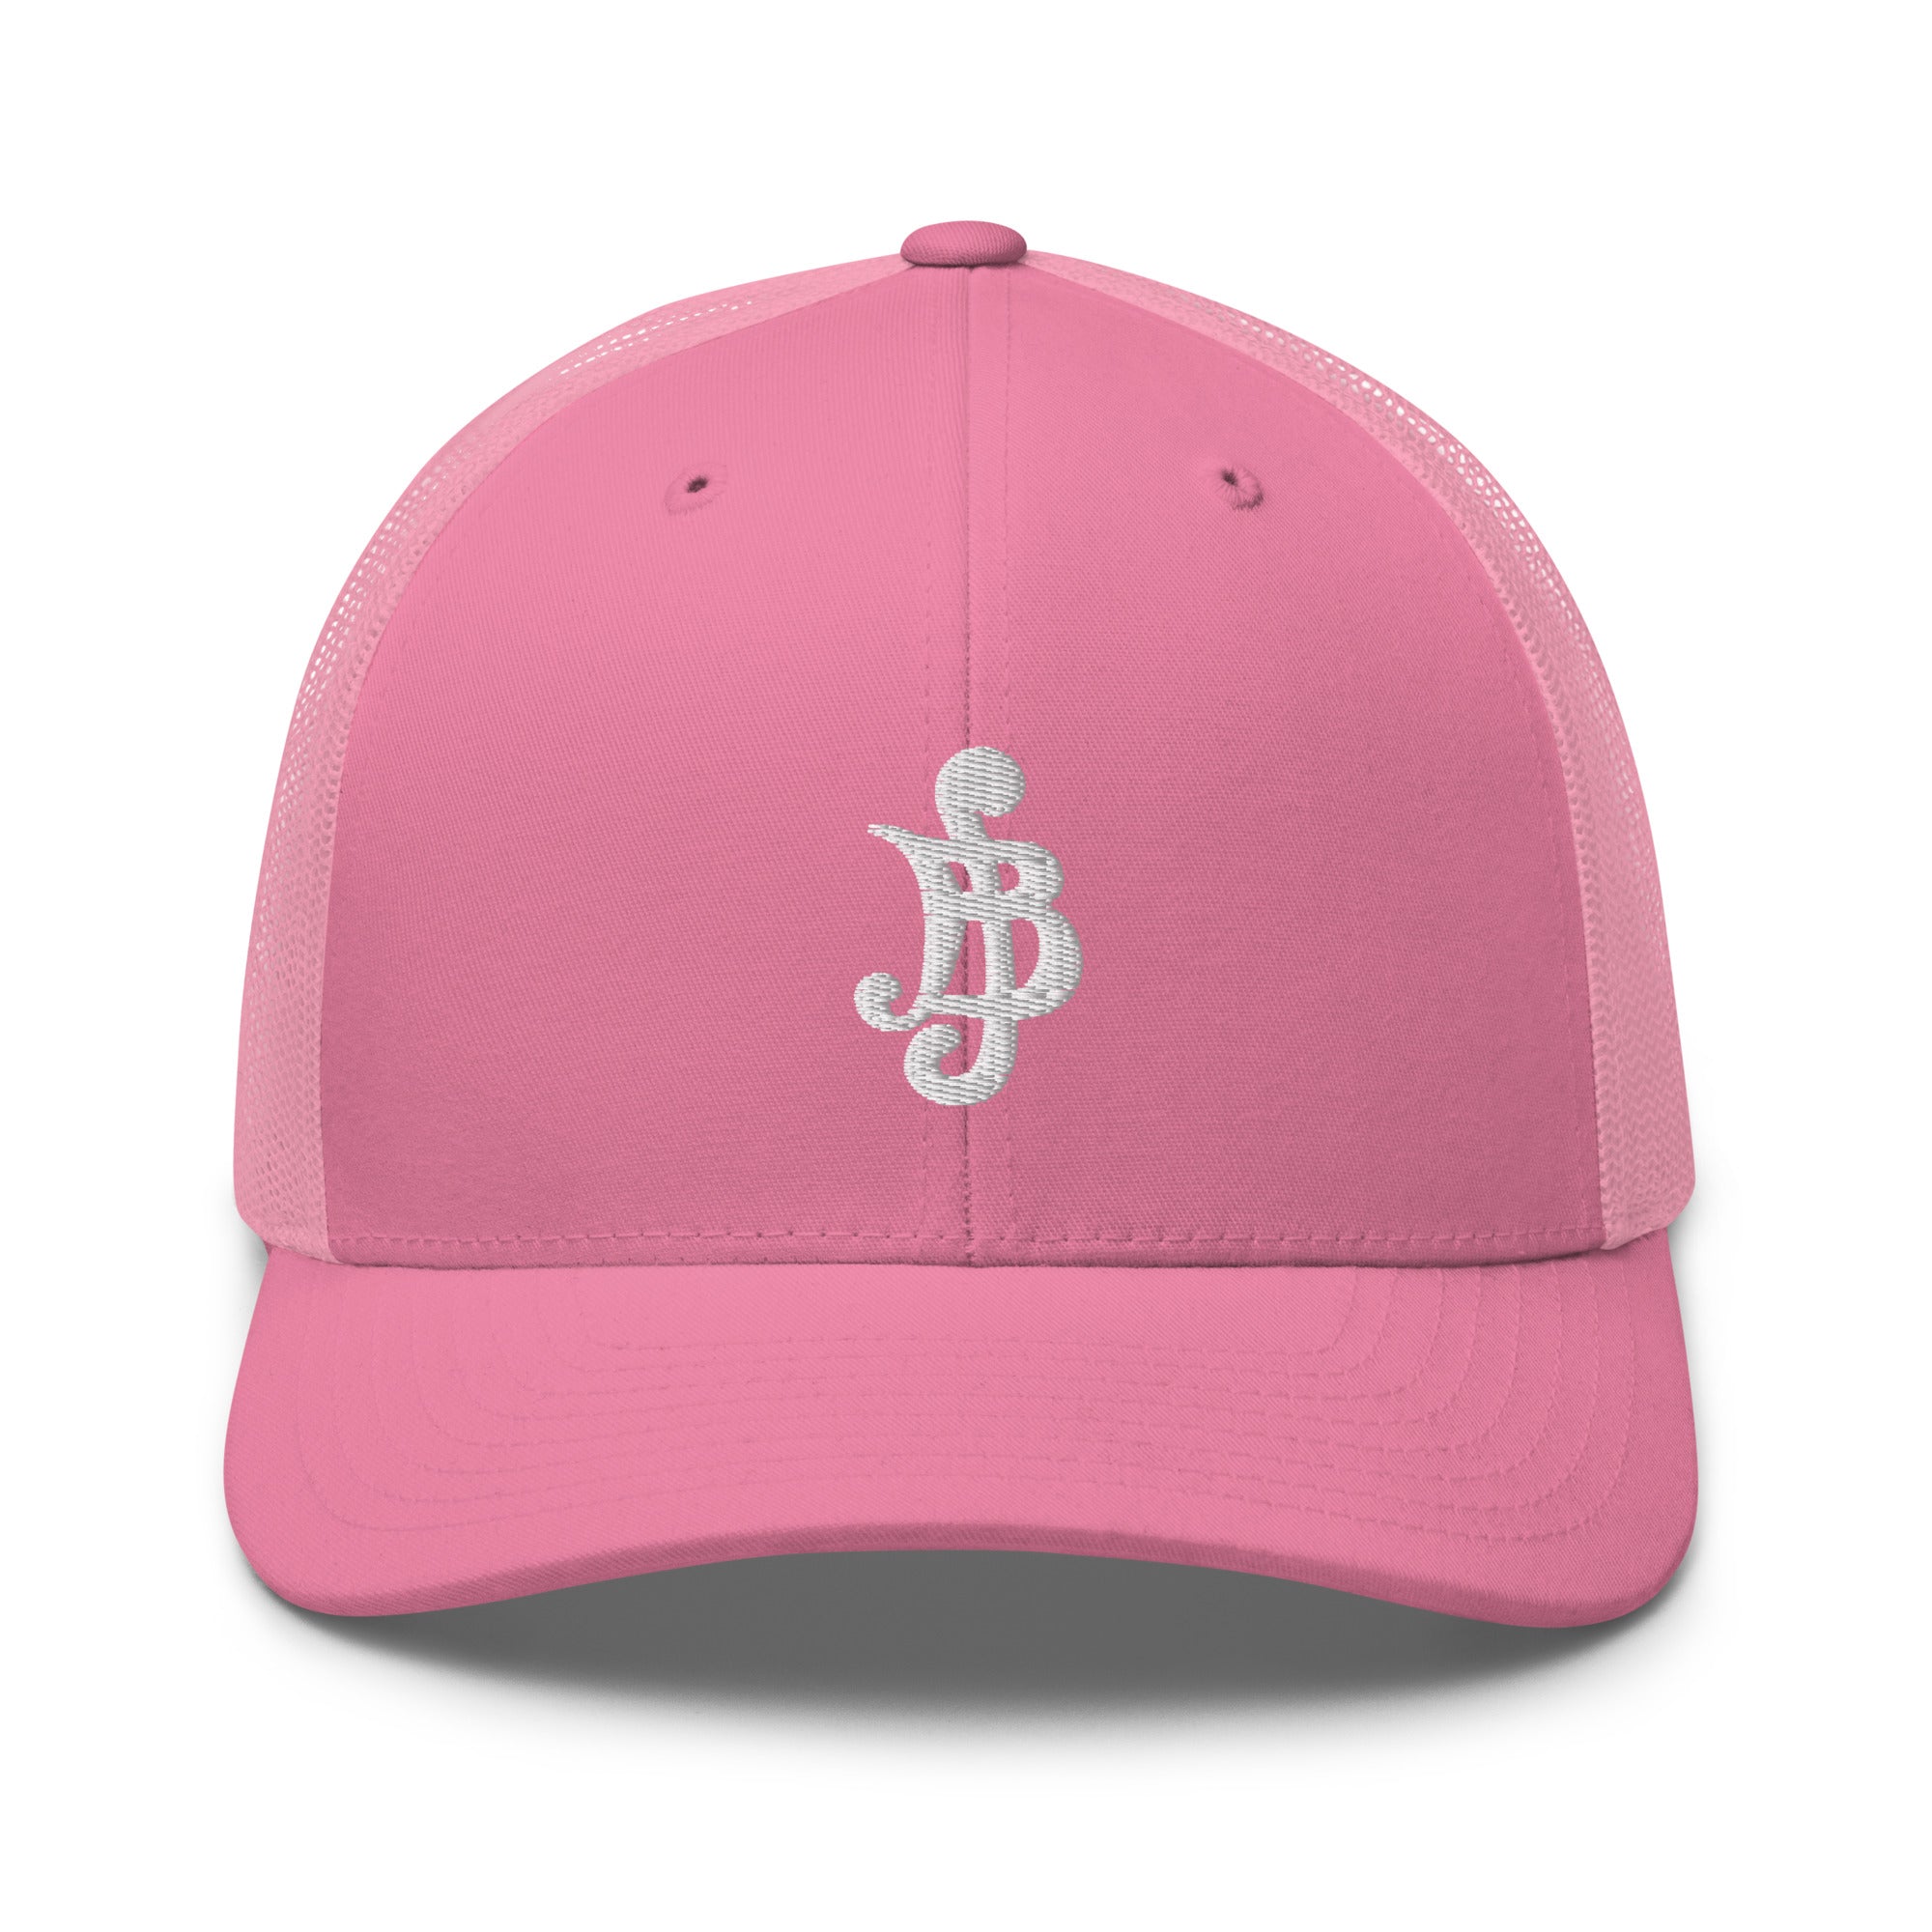 Nami Berries Embroidered Anime Trucker Hat